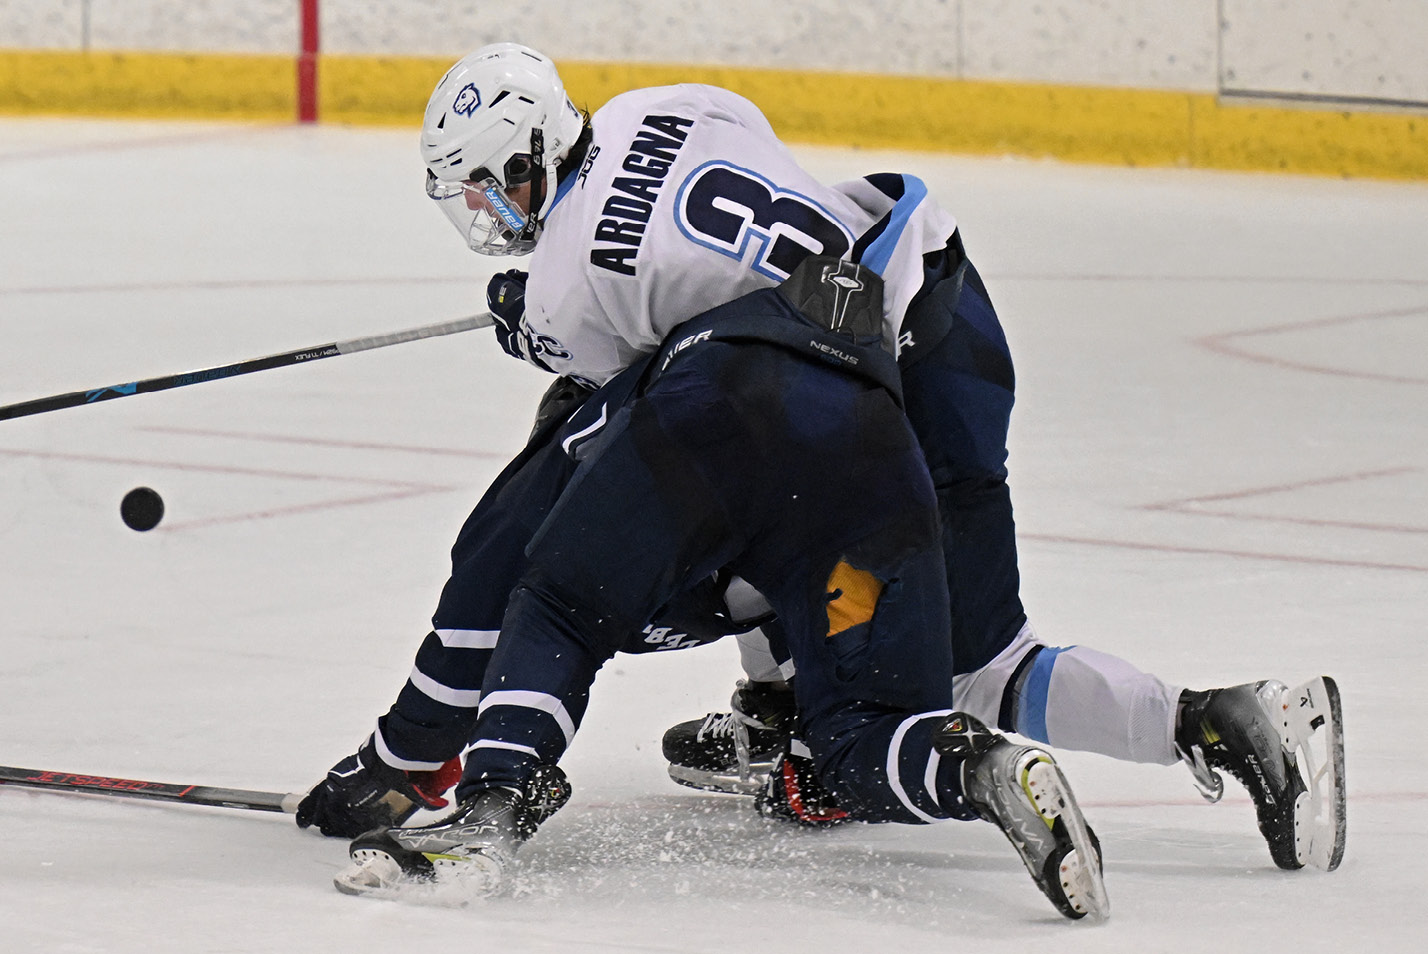 Men's hockey player crouches over an opponent vs. Middlebury